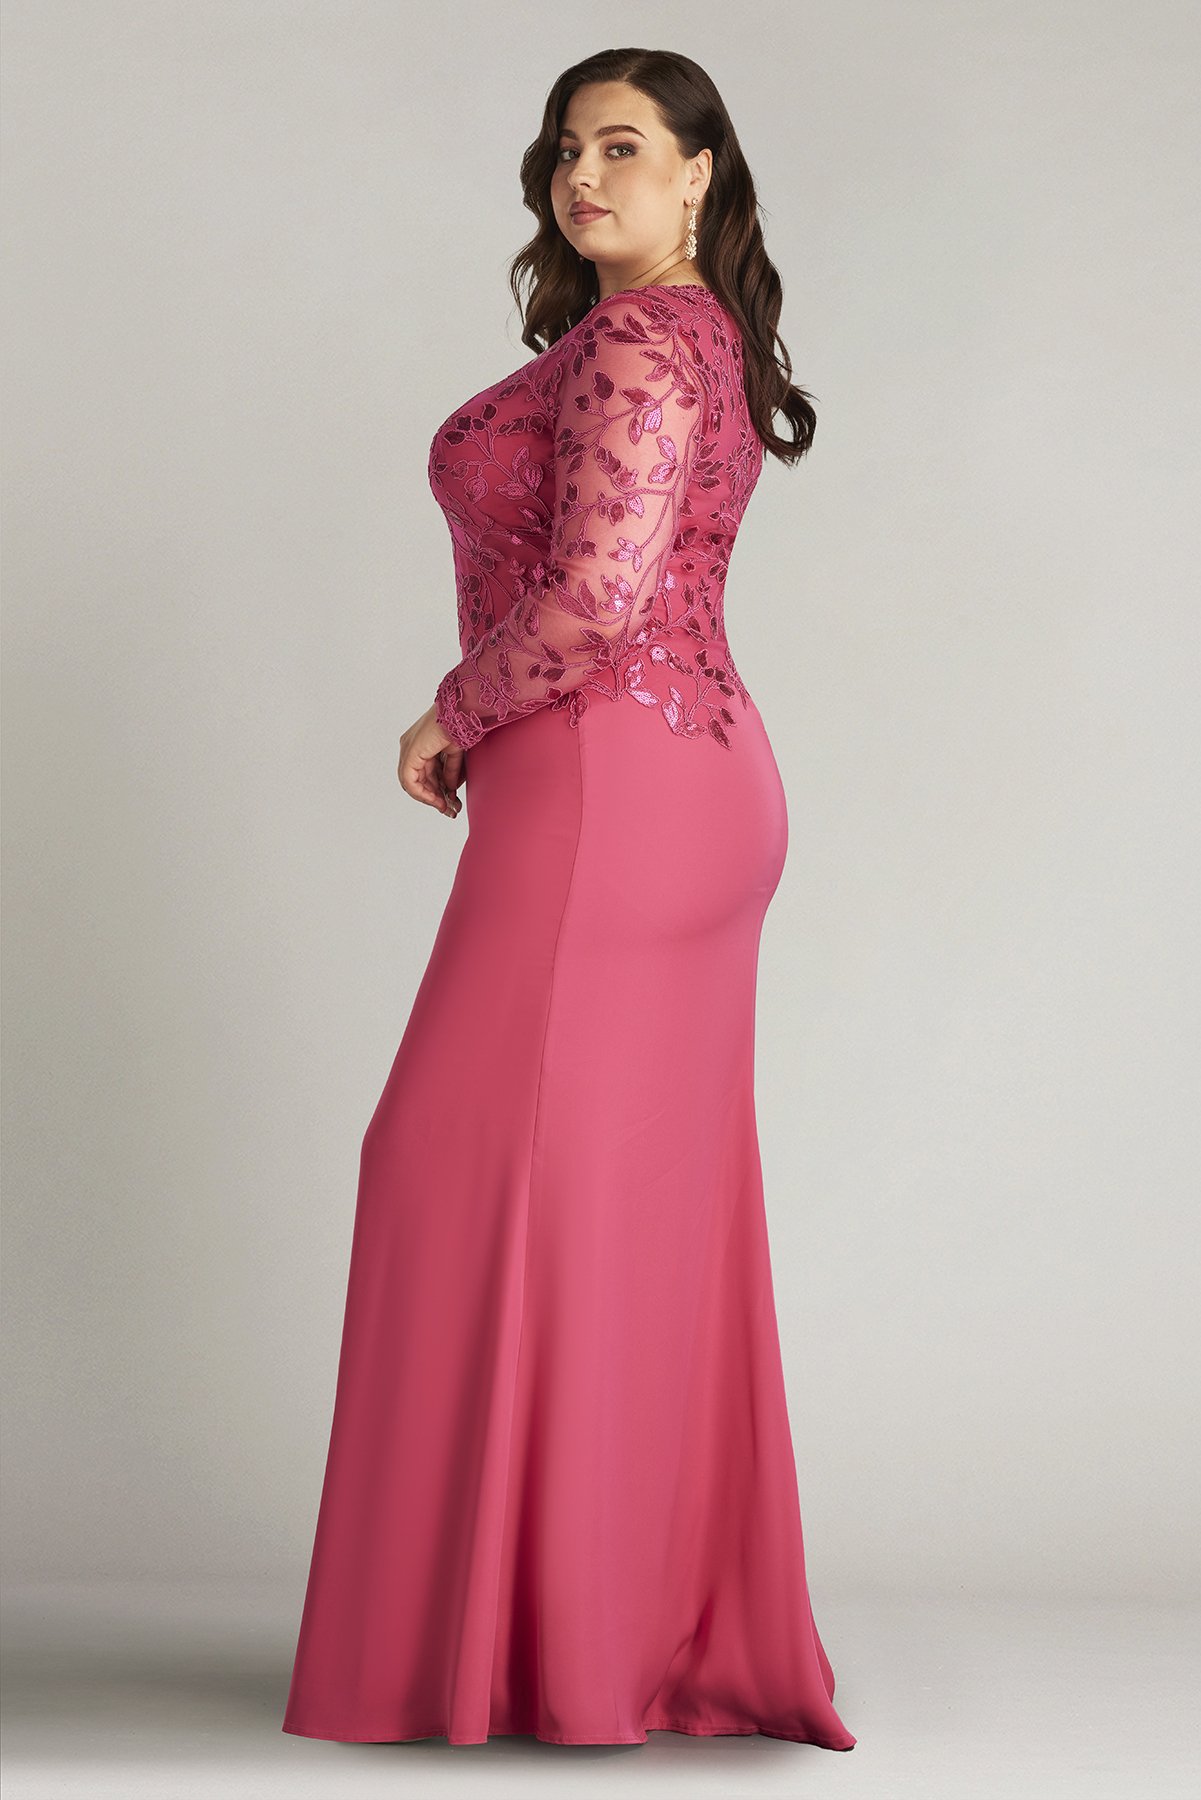 Bradwell Embroidered Crepe Gown - PLUS SIZE